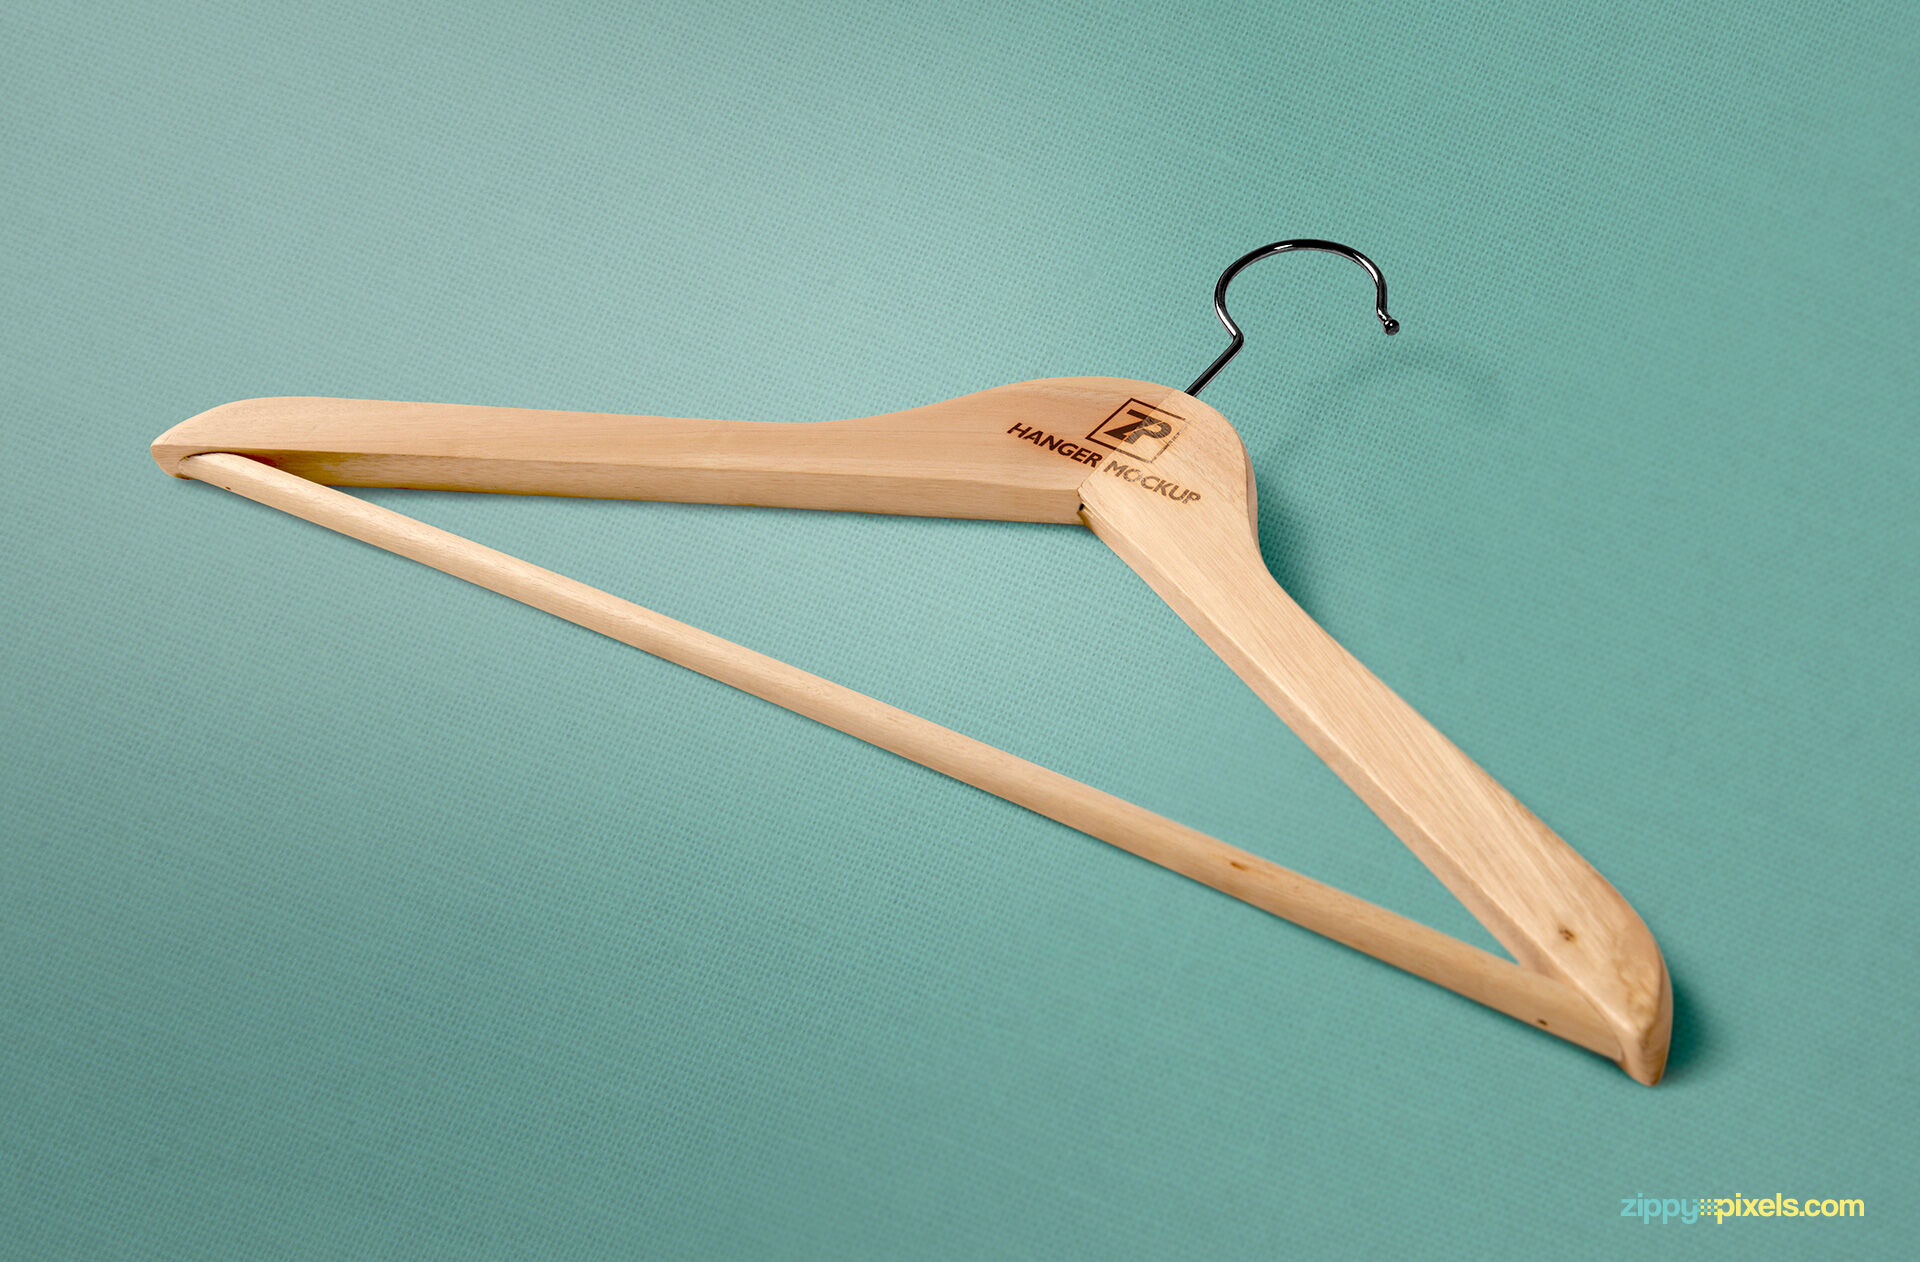 3 Mockups of Wooden Clothes Hangers FREE PSD